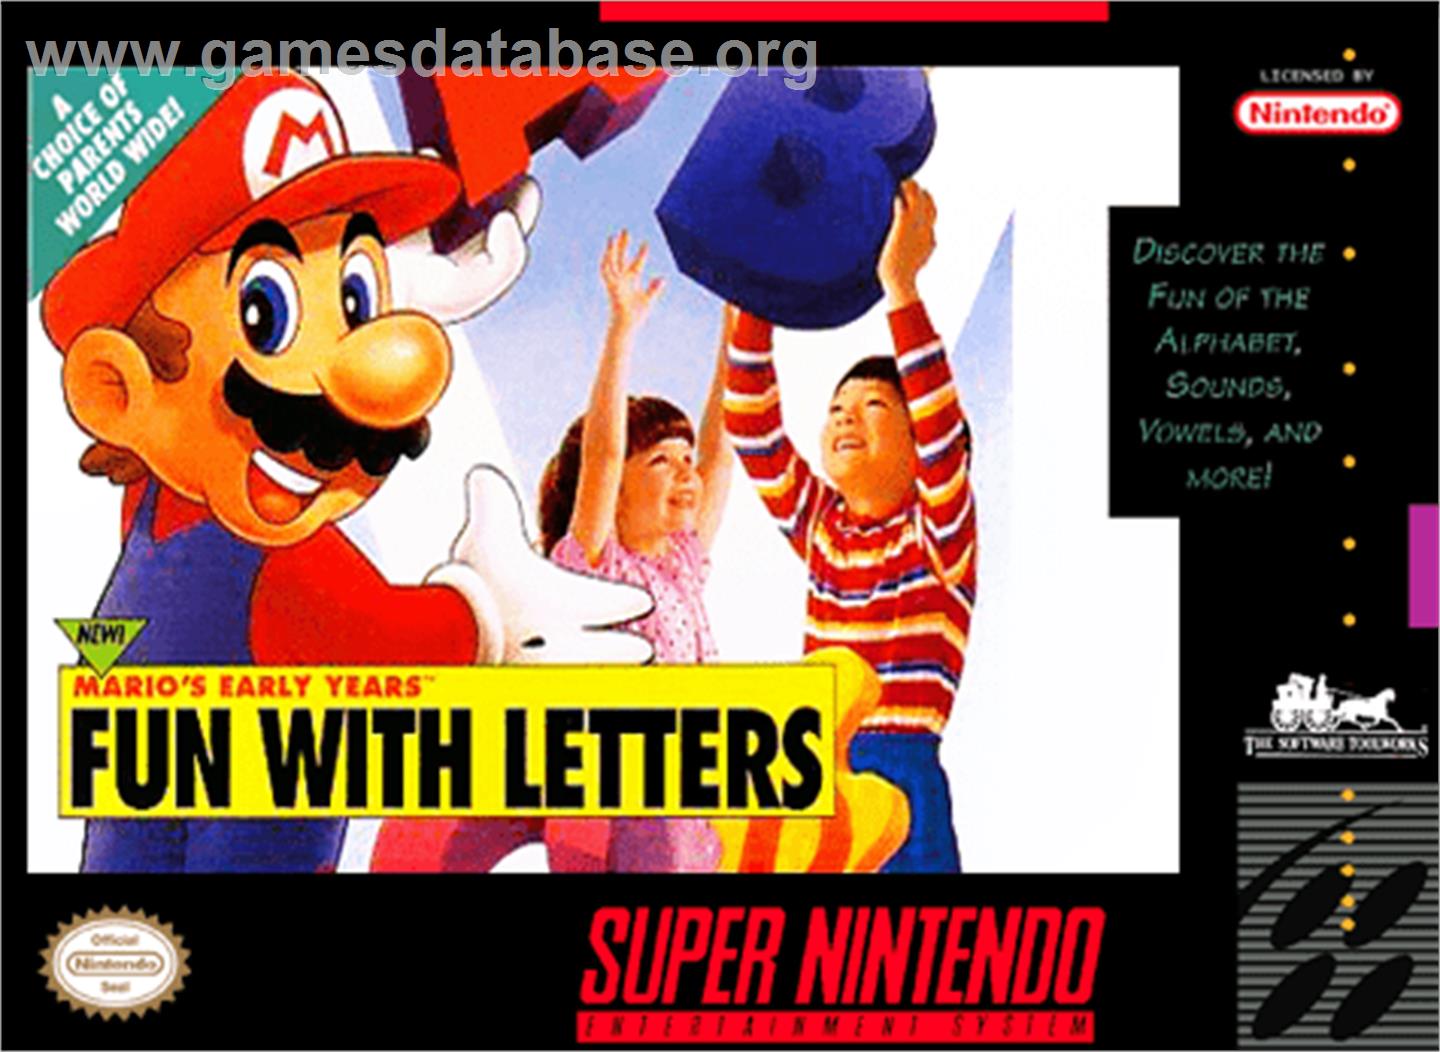 Mario's Early Years: Fun With Letters - Nintendo SNES - Artwork - Box